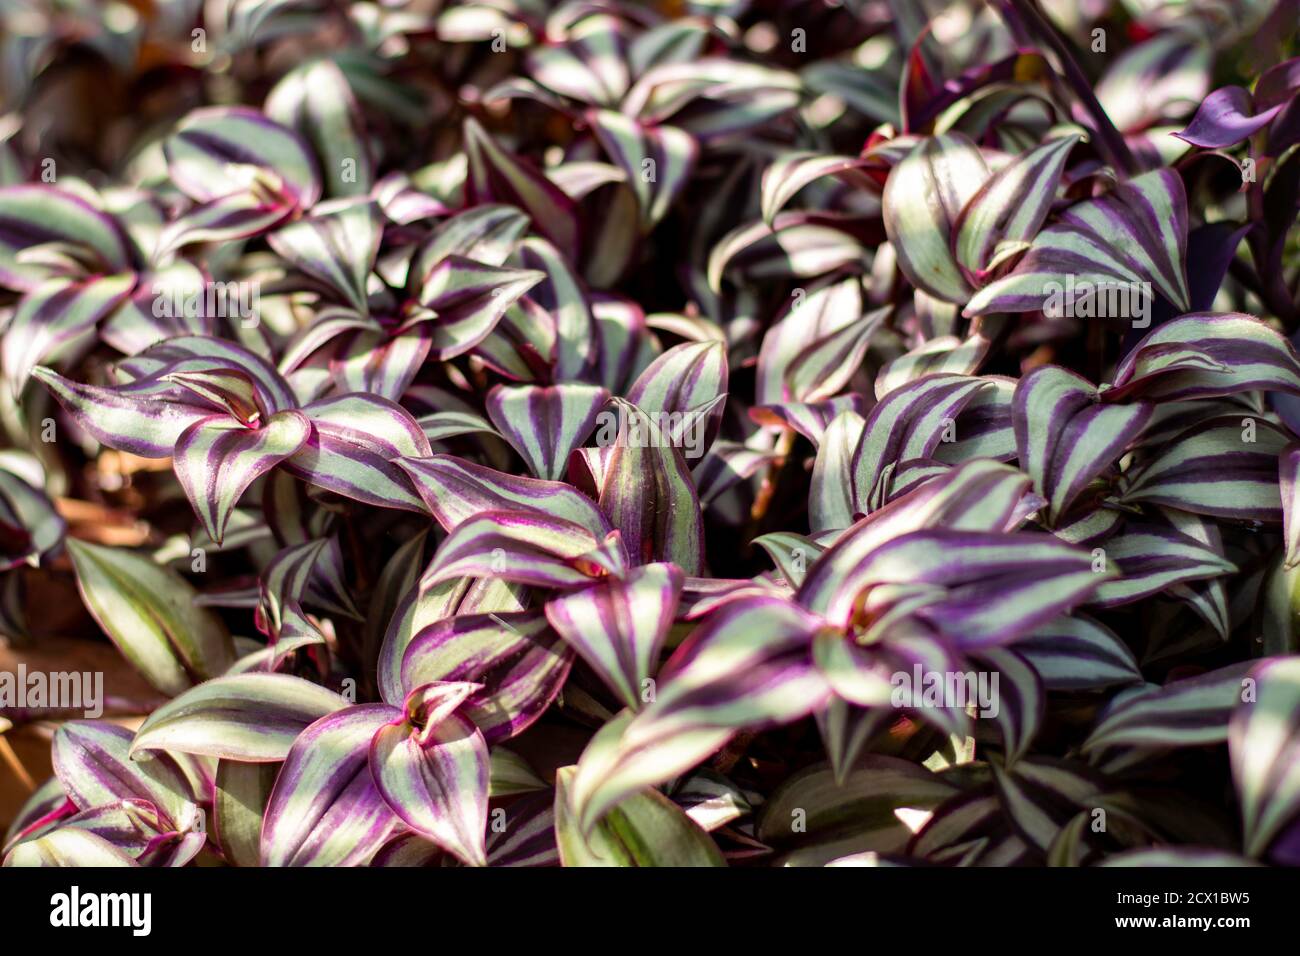 Tradescantia Zebrina houseplants in sunlight. Also known as The Wandering Jew, Wandering Dude or Inch Plant. Indoor plant. Stock Photo